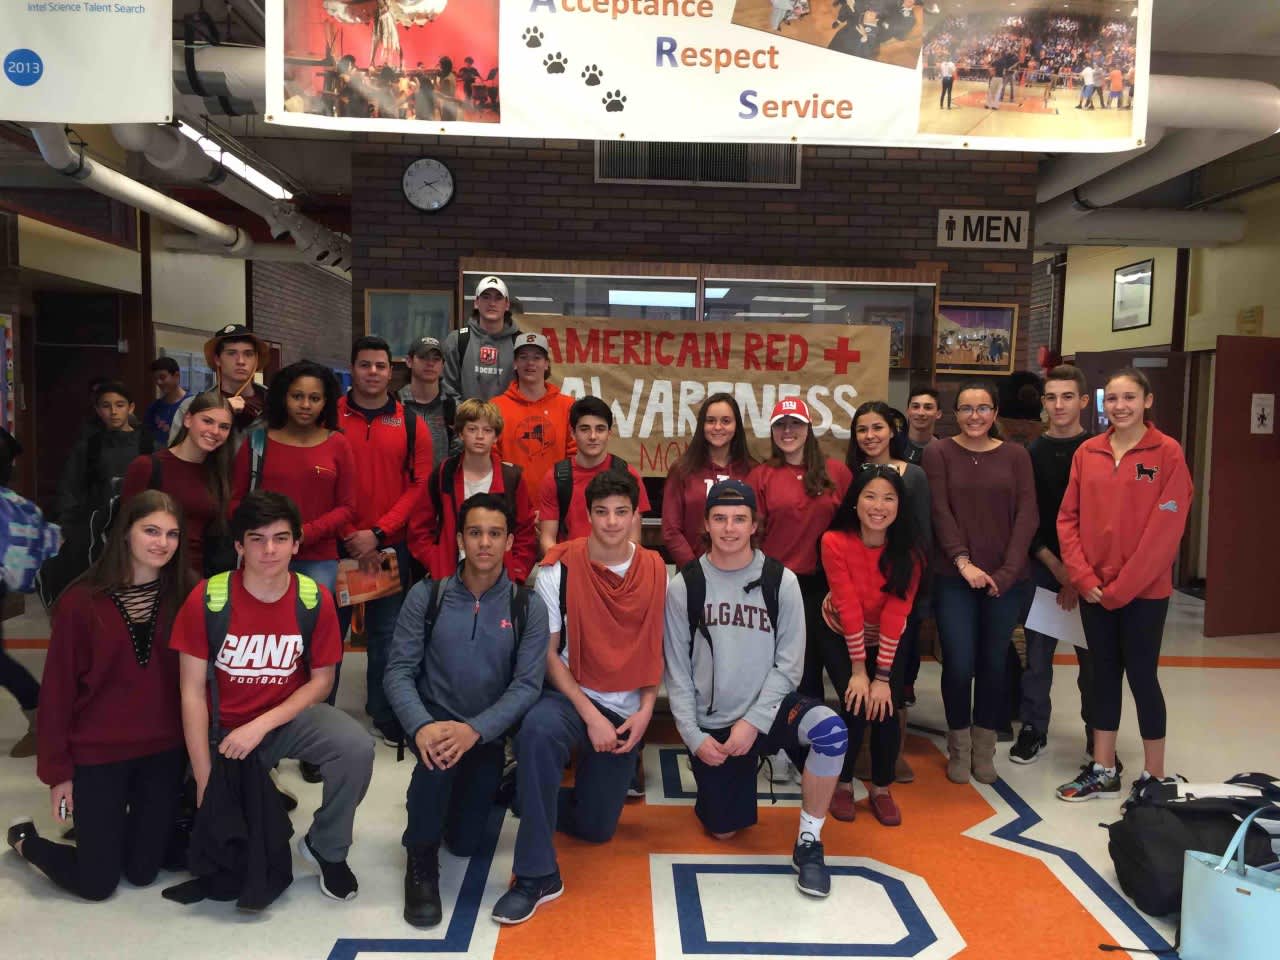 Members of Briarcliff High School’s American Red Cross Club wore red to raise awareness for the American Red Cross mission.